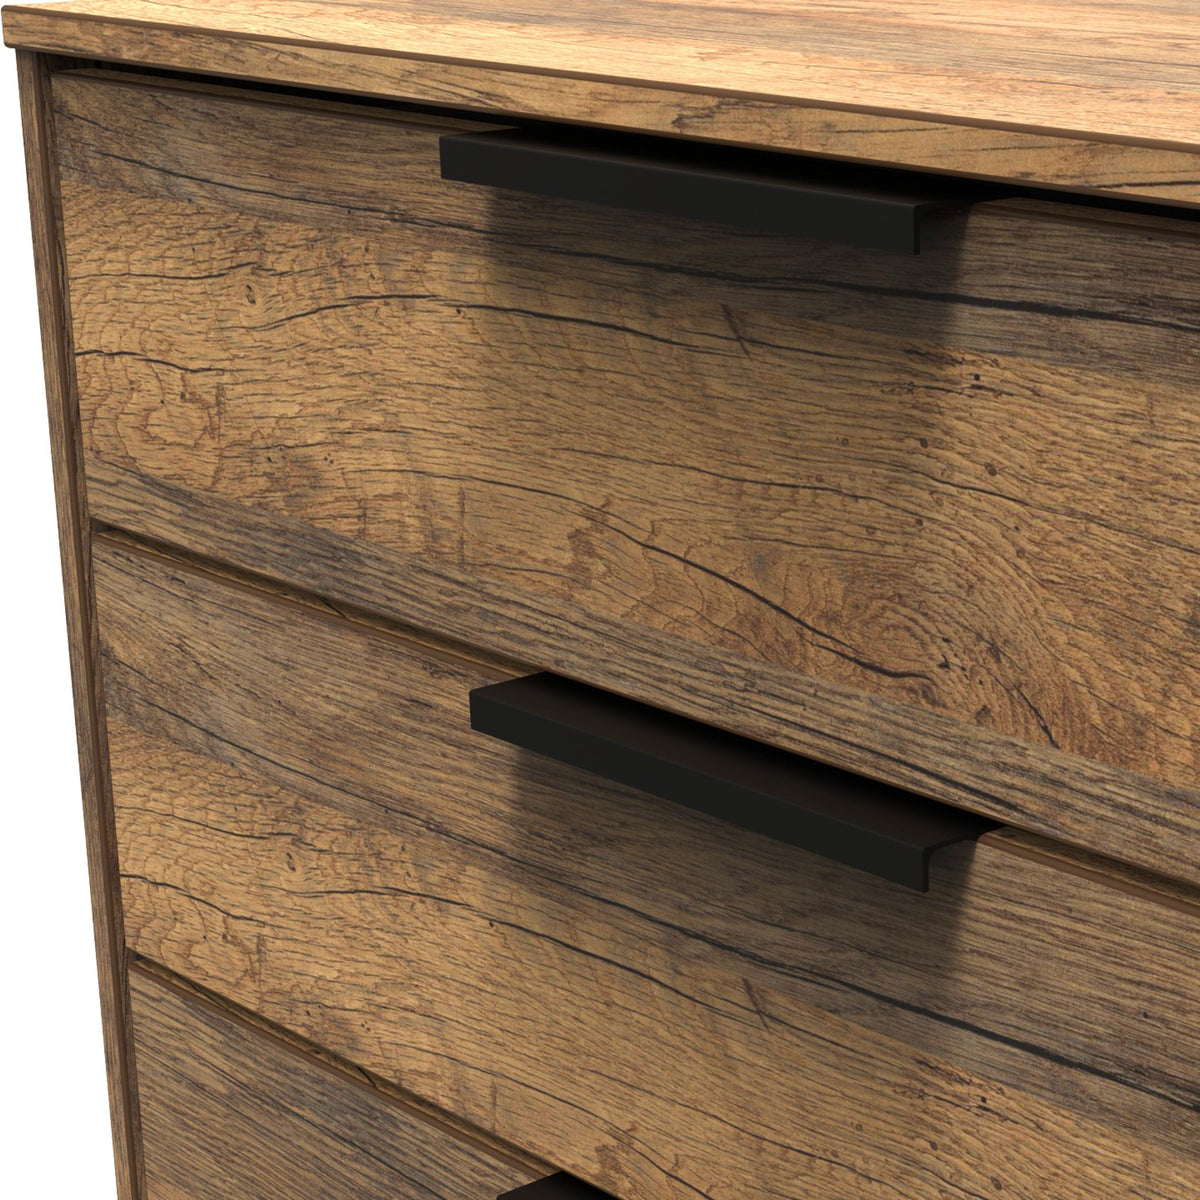 Moreno Rustic Oak 5 Drawer Chest with Black Hairpin Legs